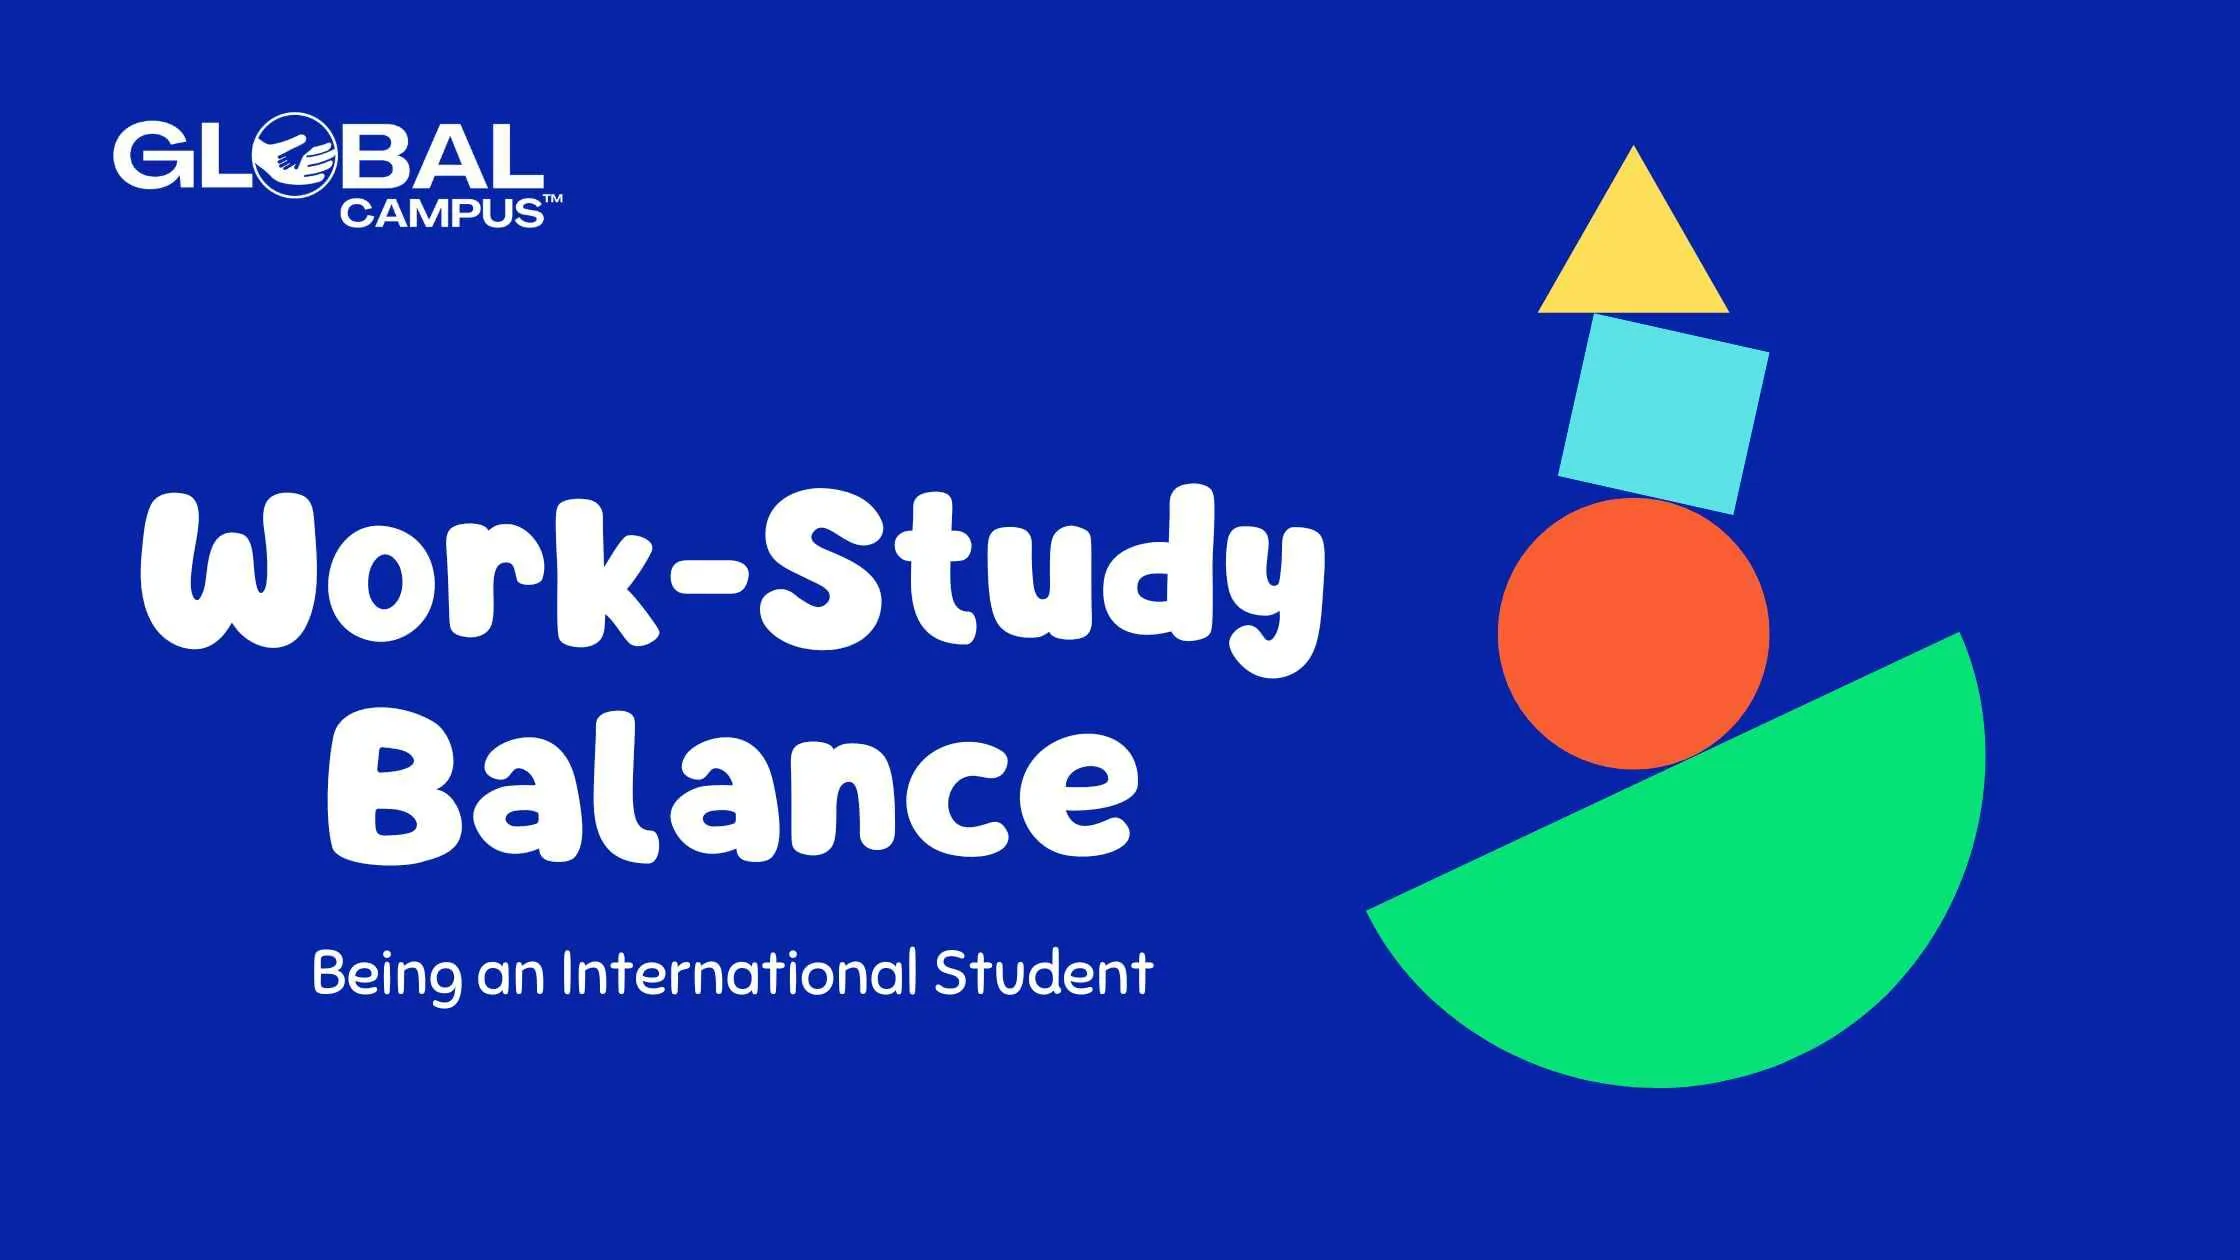 How to balance work & study while being an international student?